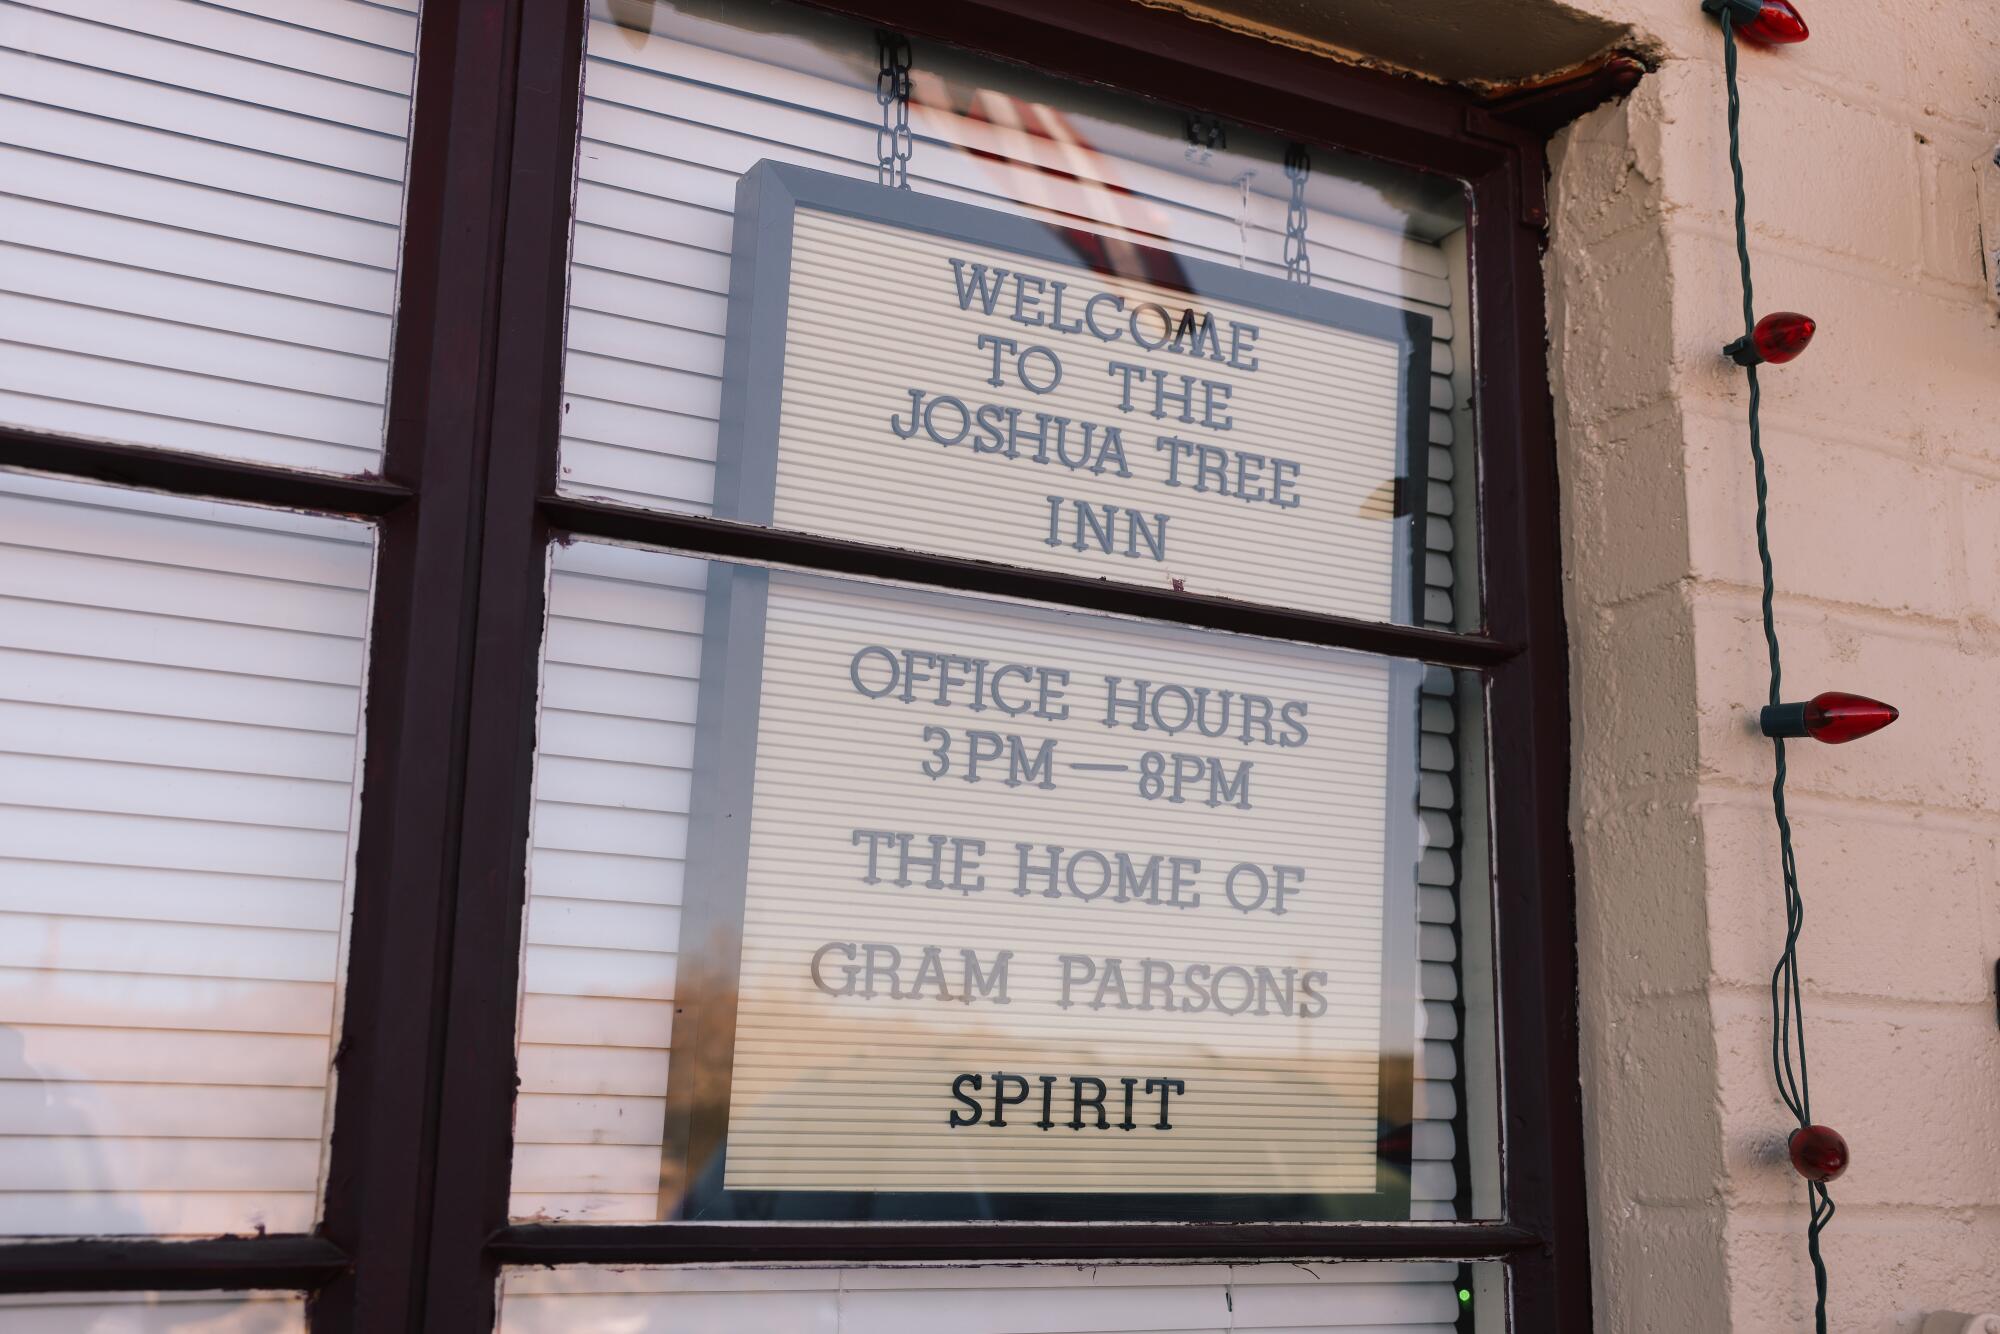 Signage welcomes folks to Joshua Tree Inn, the “home of Gram Parsons' spirit."